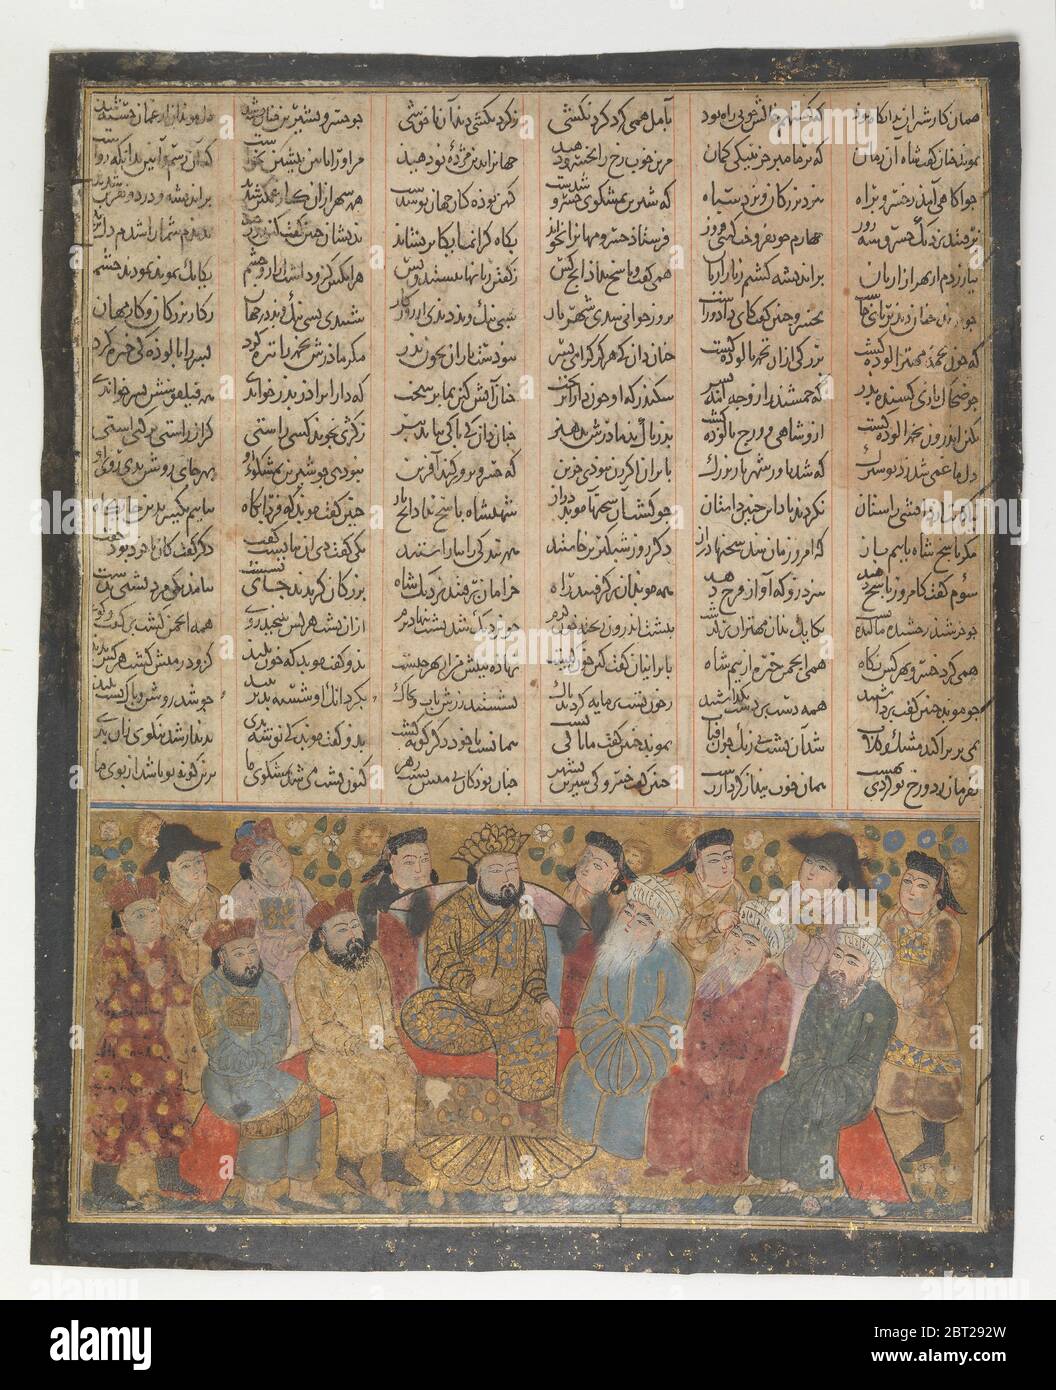 The Nobles and Mubids Advise Khusrau Parviz about Shirin, Folio from the First Small Shahnama (Book of Kings), ca. 1300-30. Stock Photo